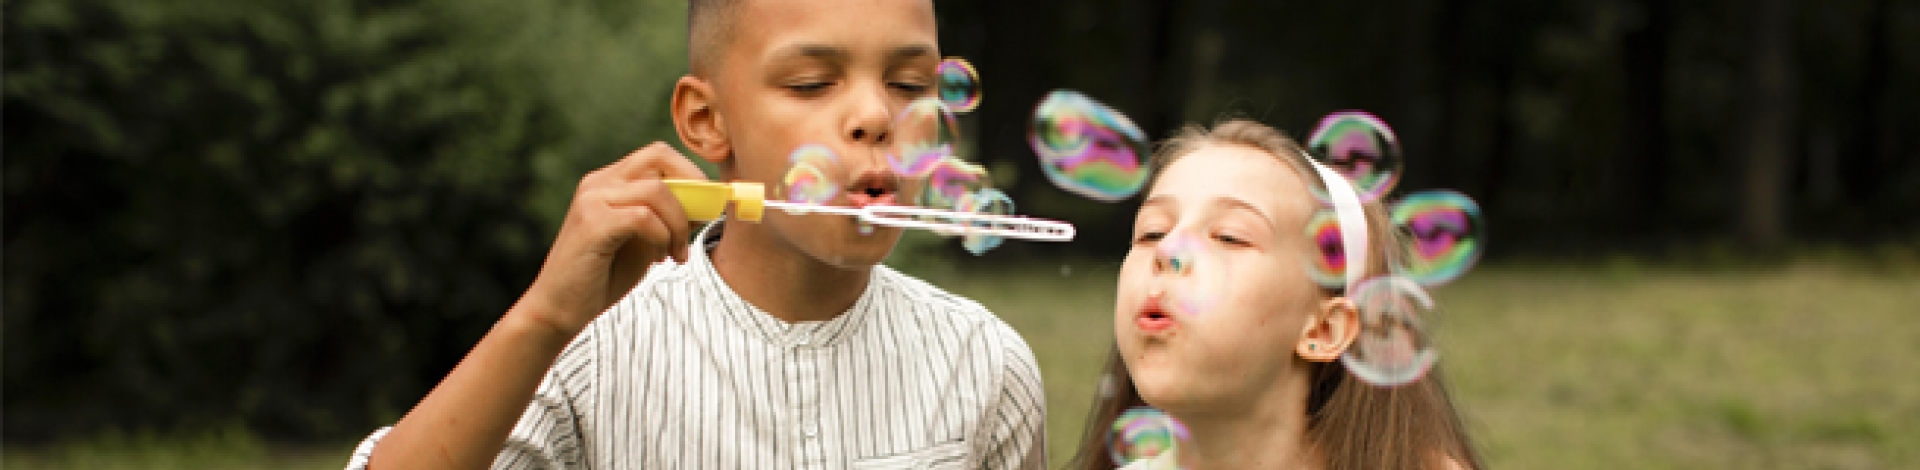 Children blowing bubbles and making friends outside